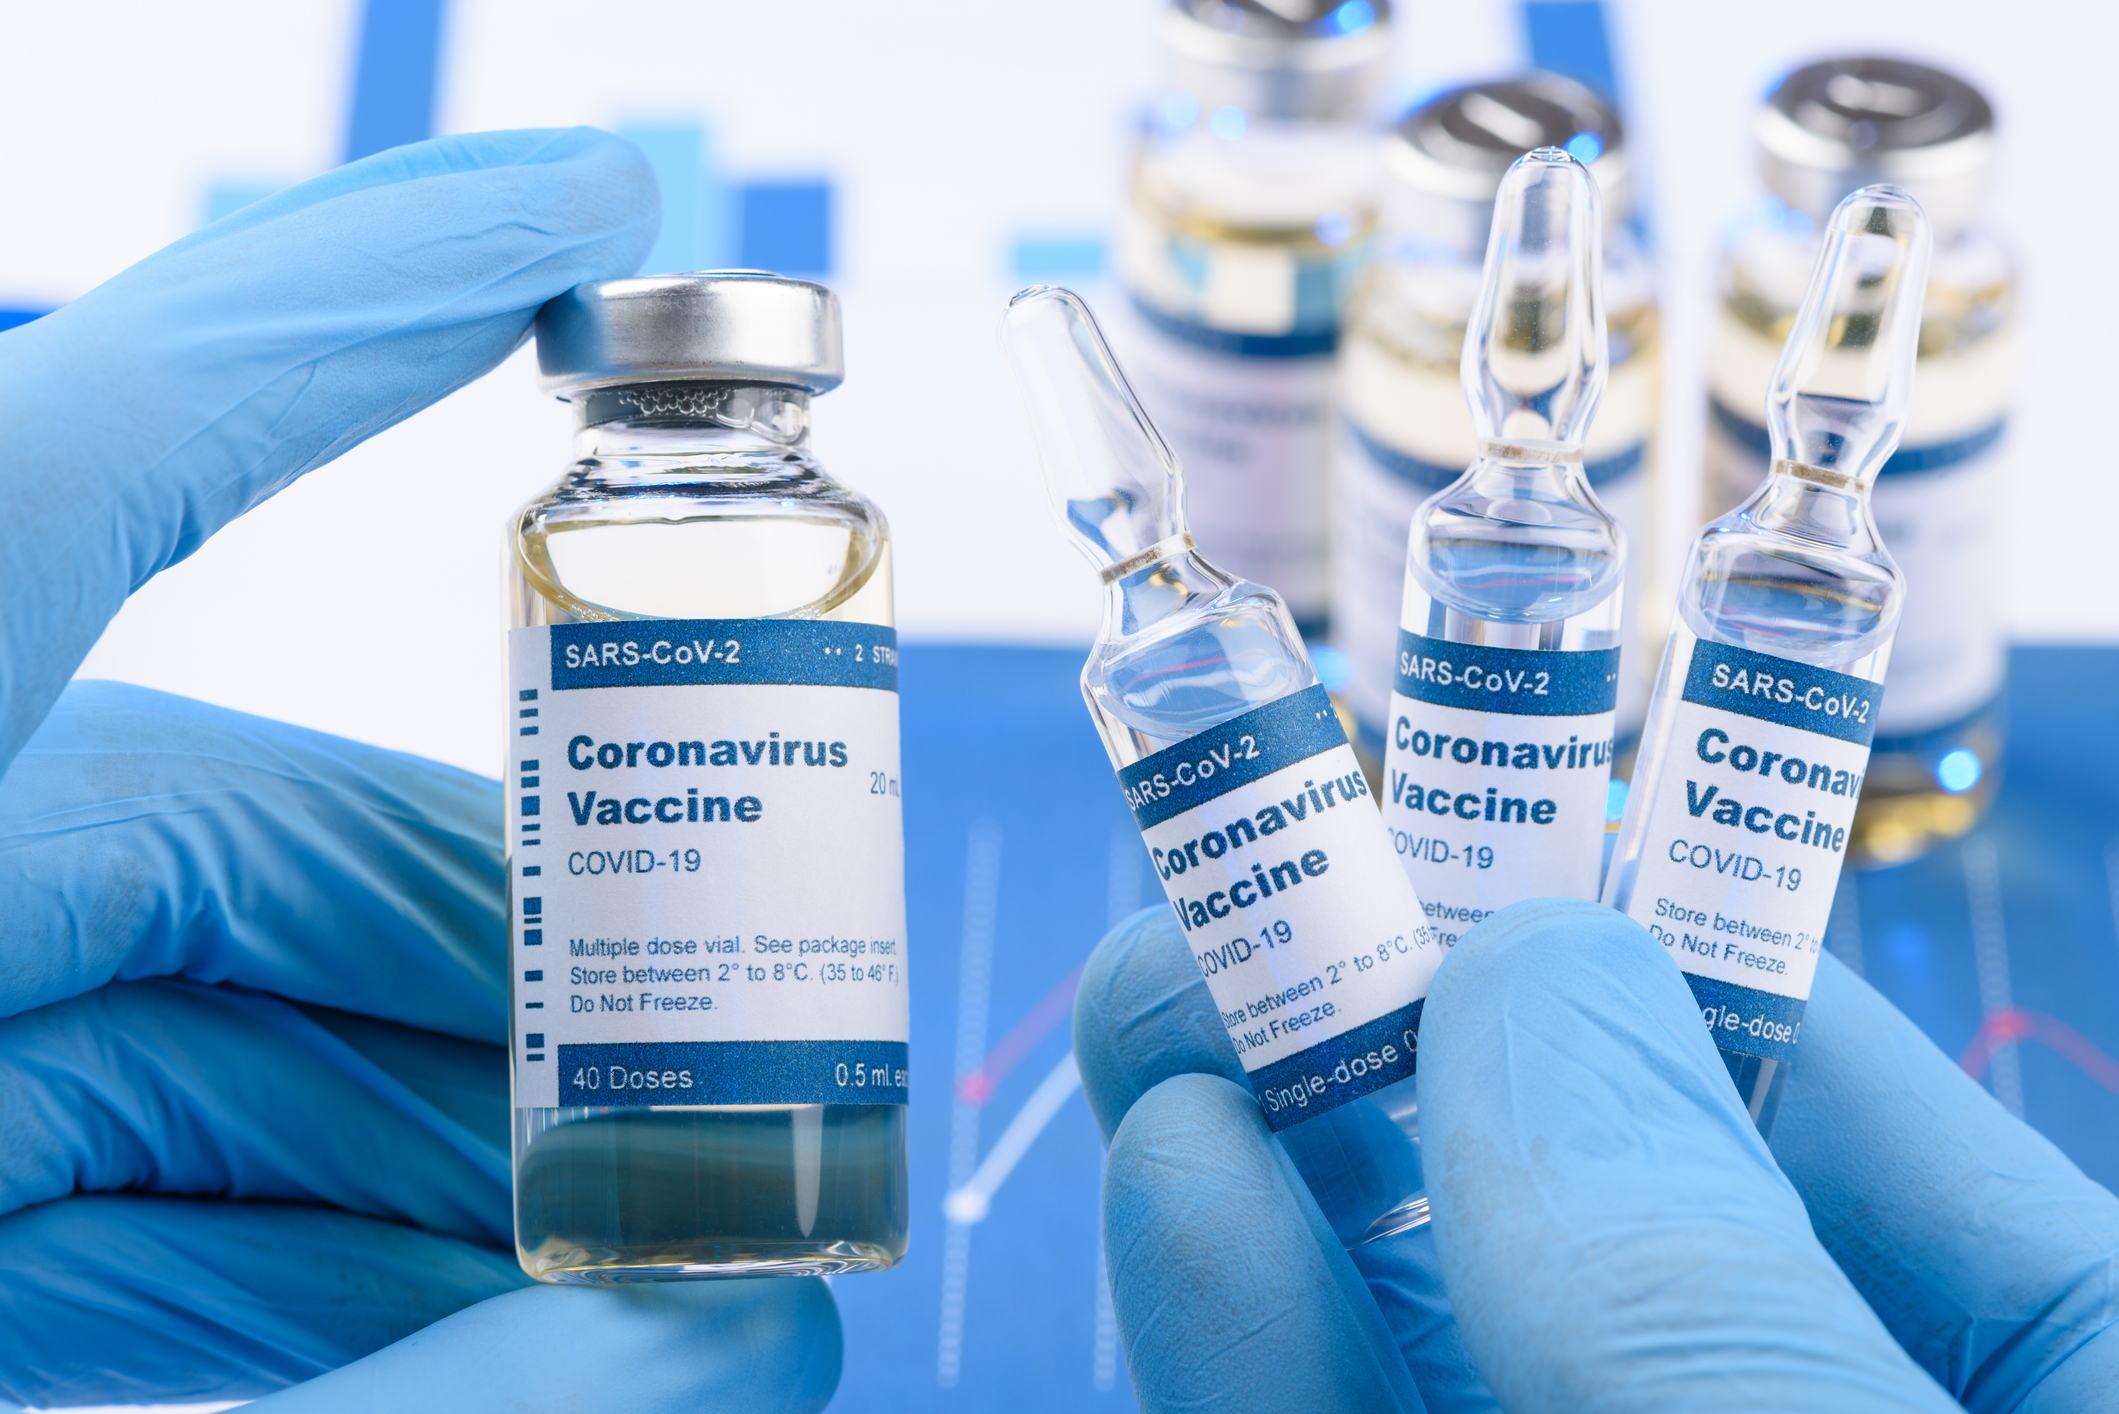 Melissa in the Morning: Vaccines Overseas